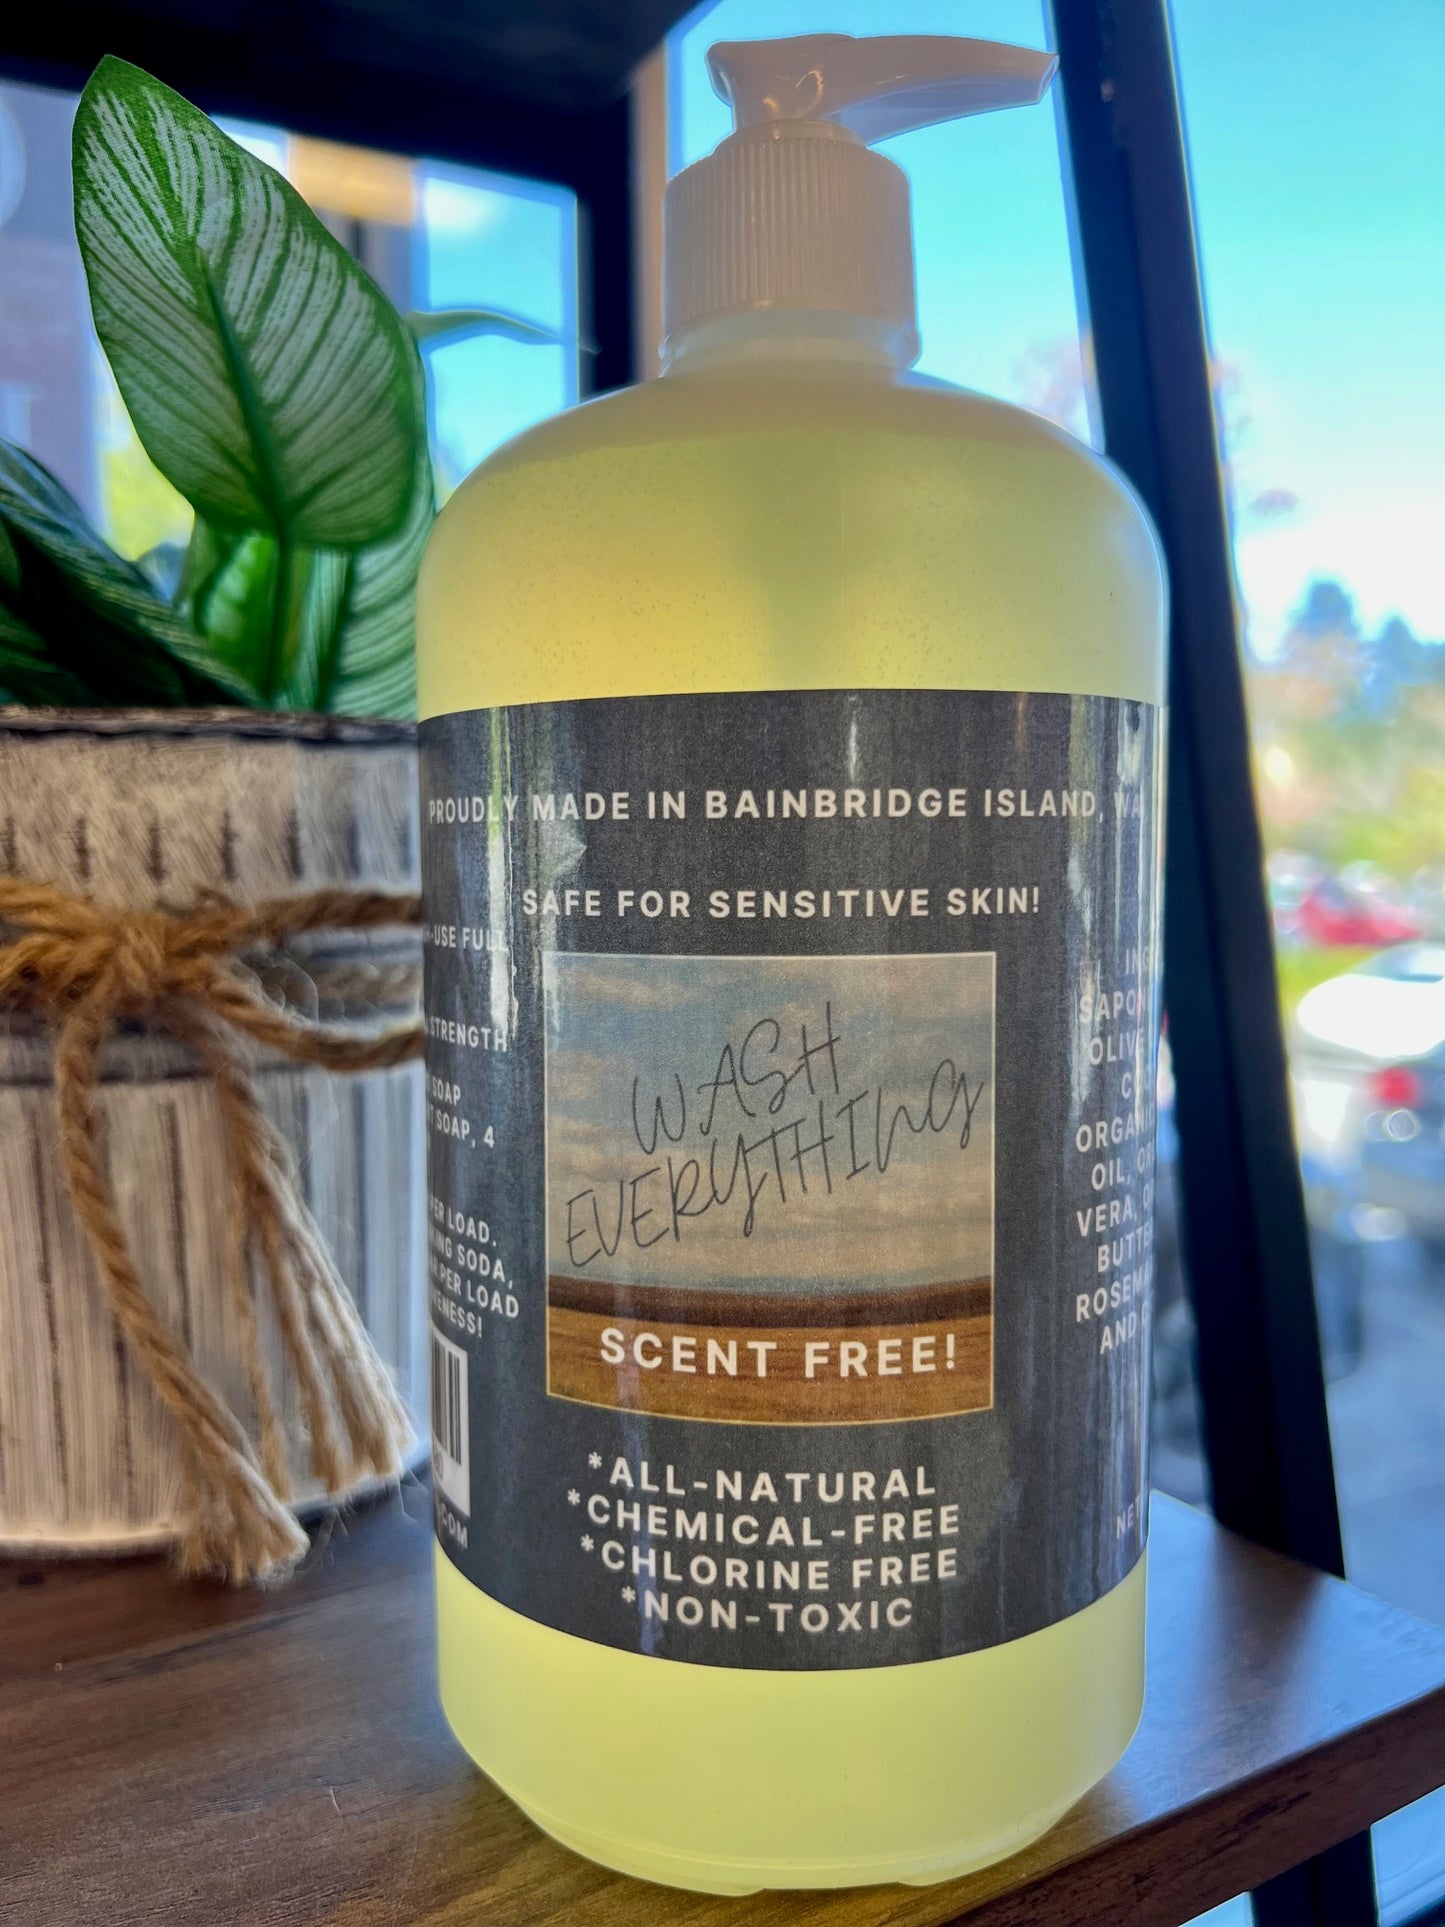 Wash Everything! Scent-FREE